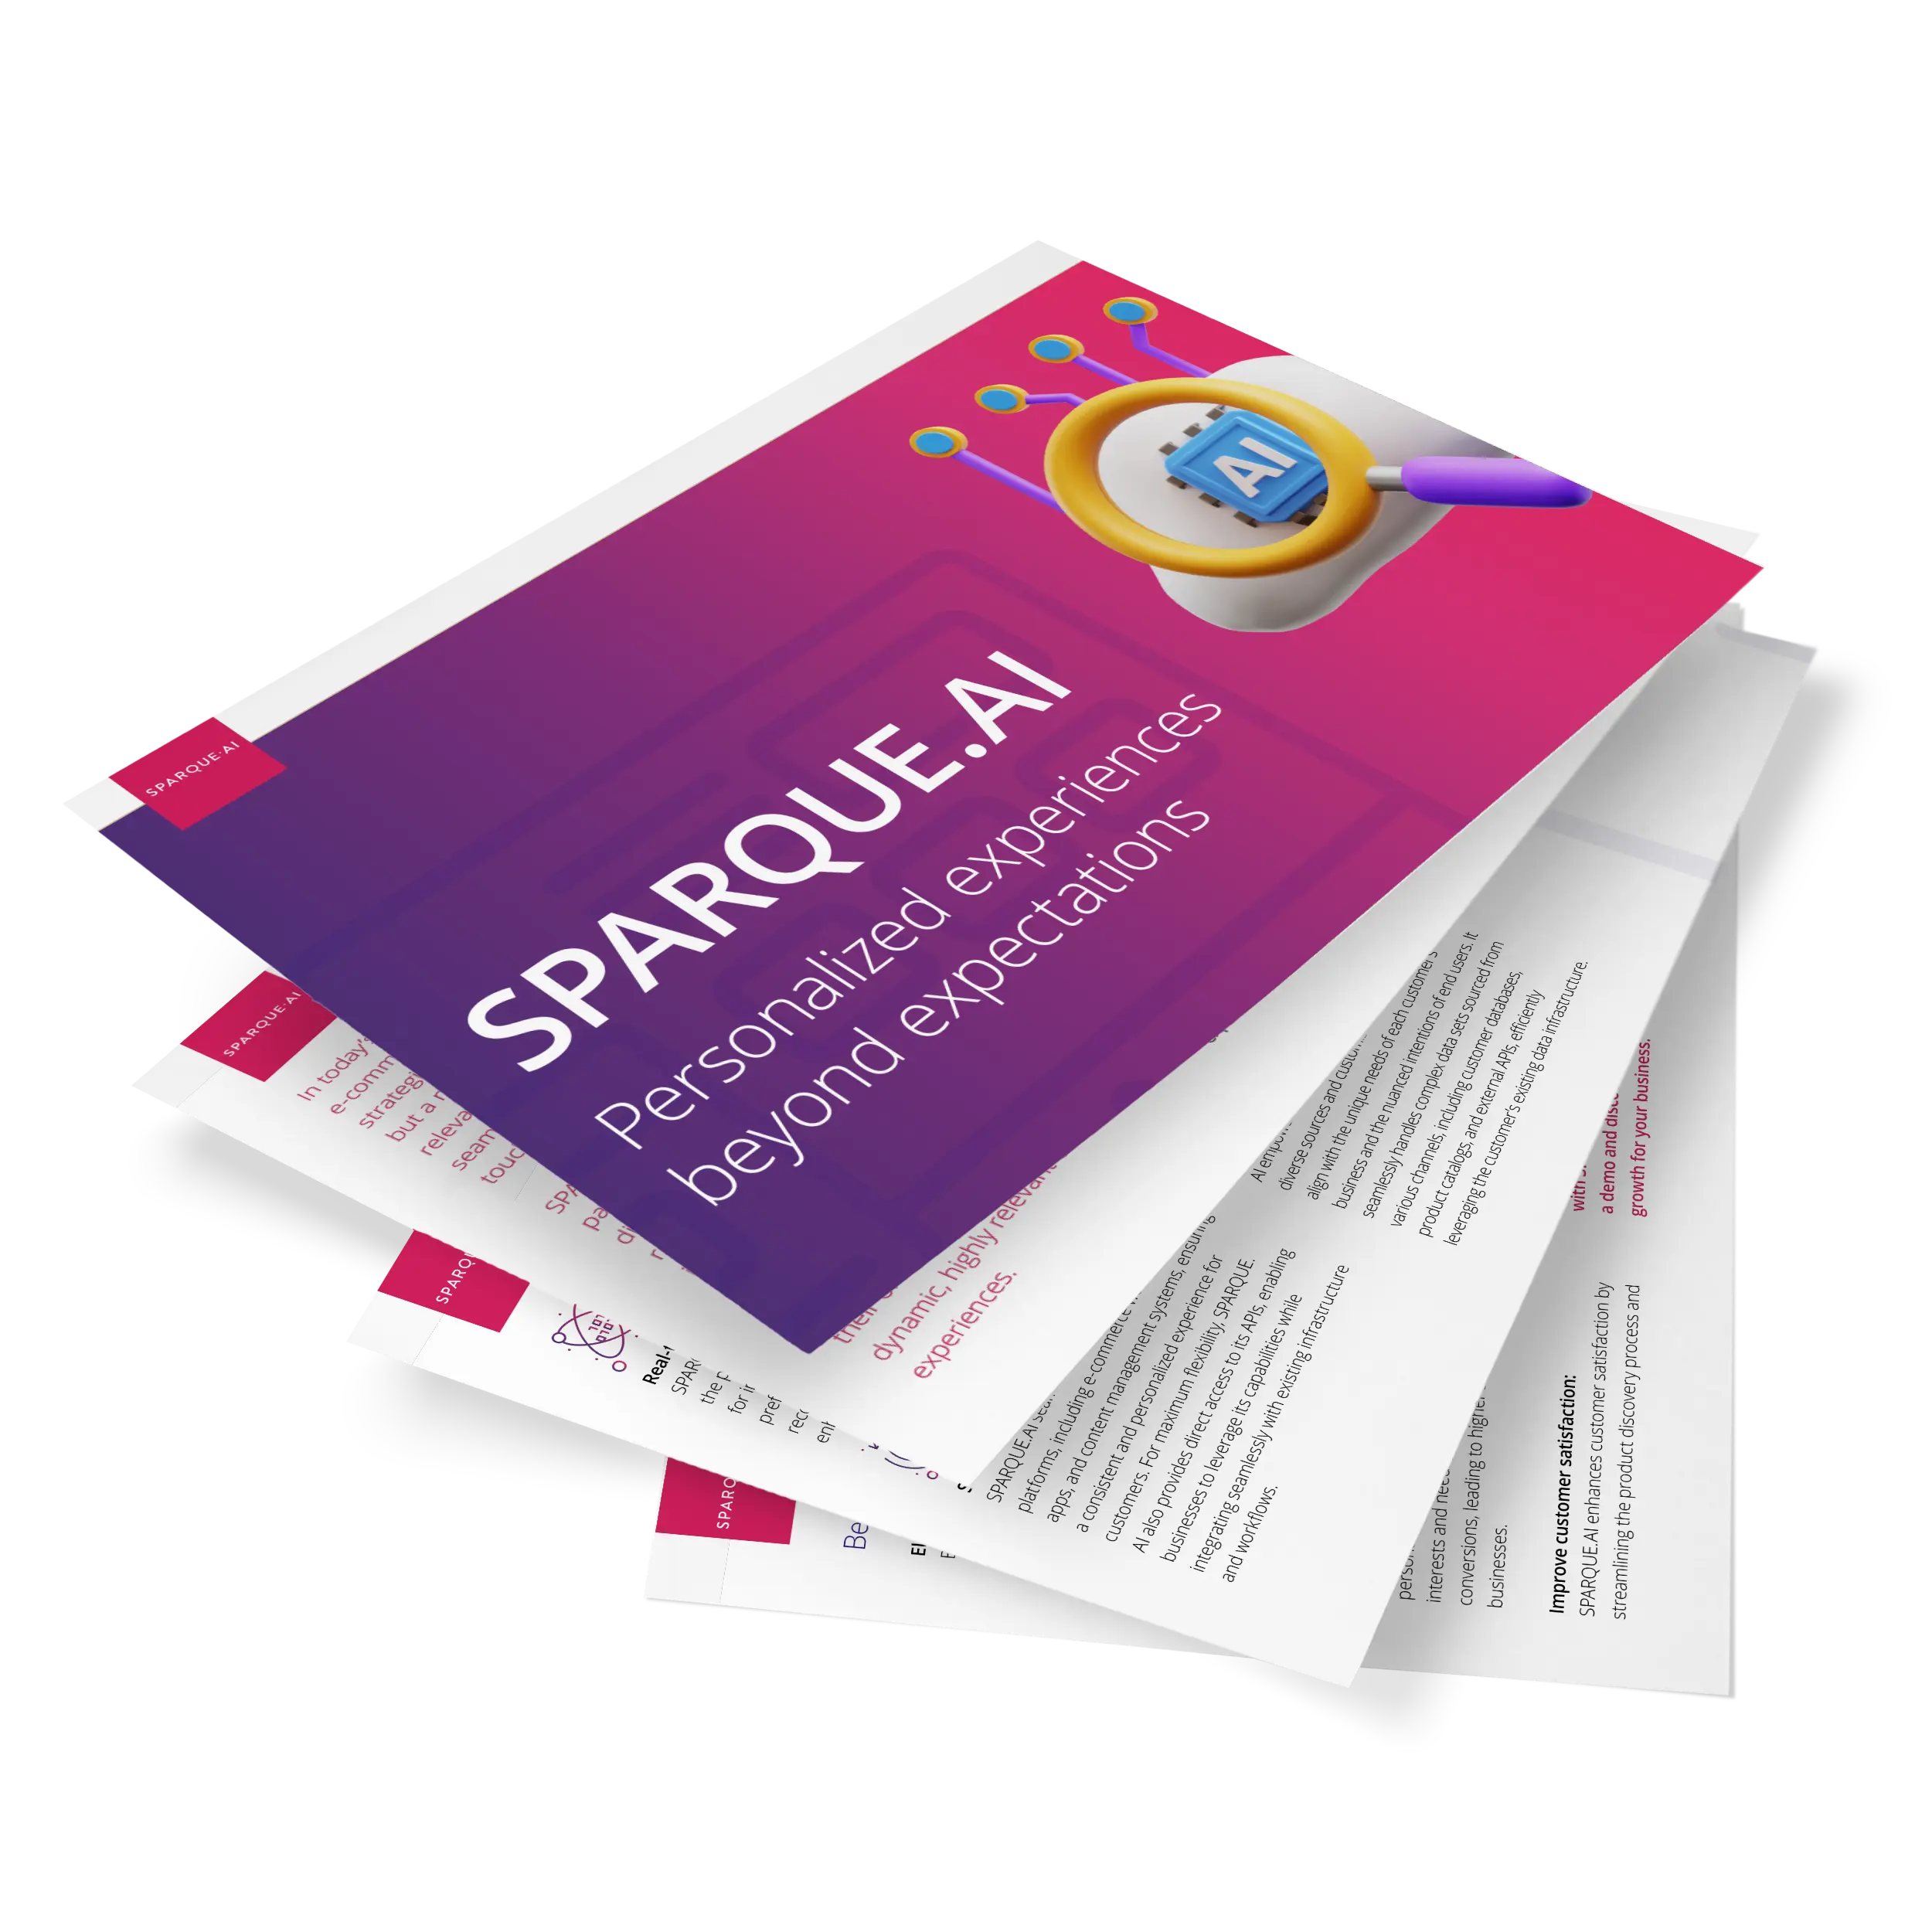 search and recommendations powered by SPARQUE.AI - brochure   